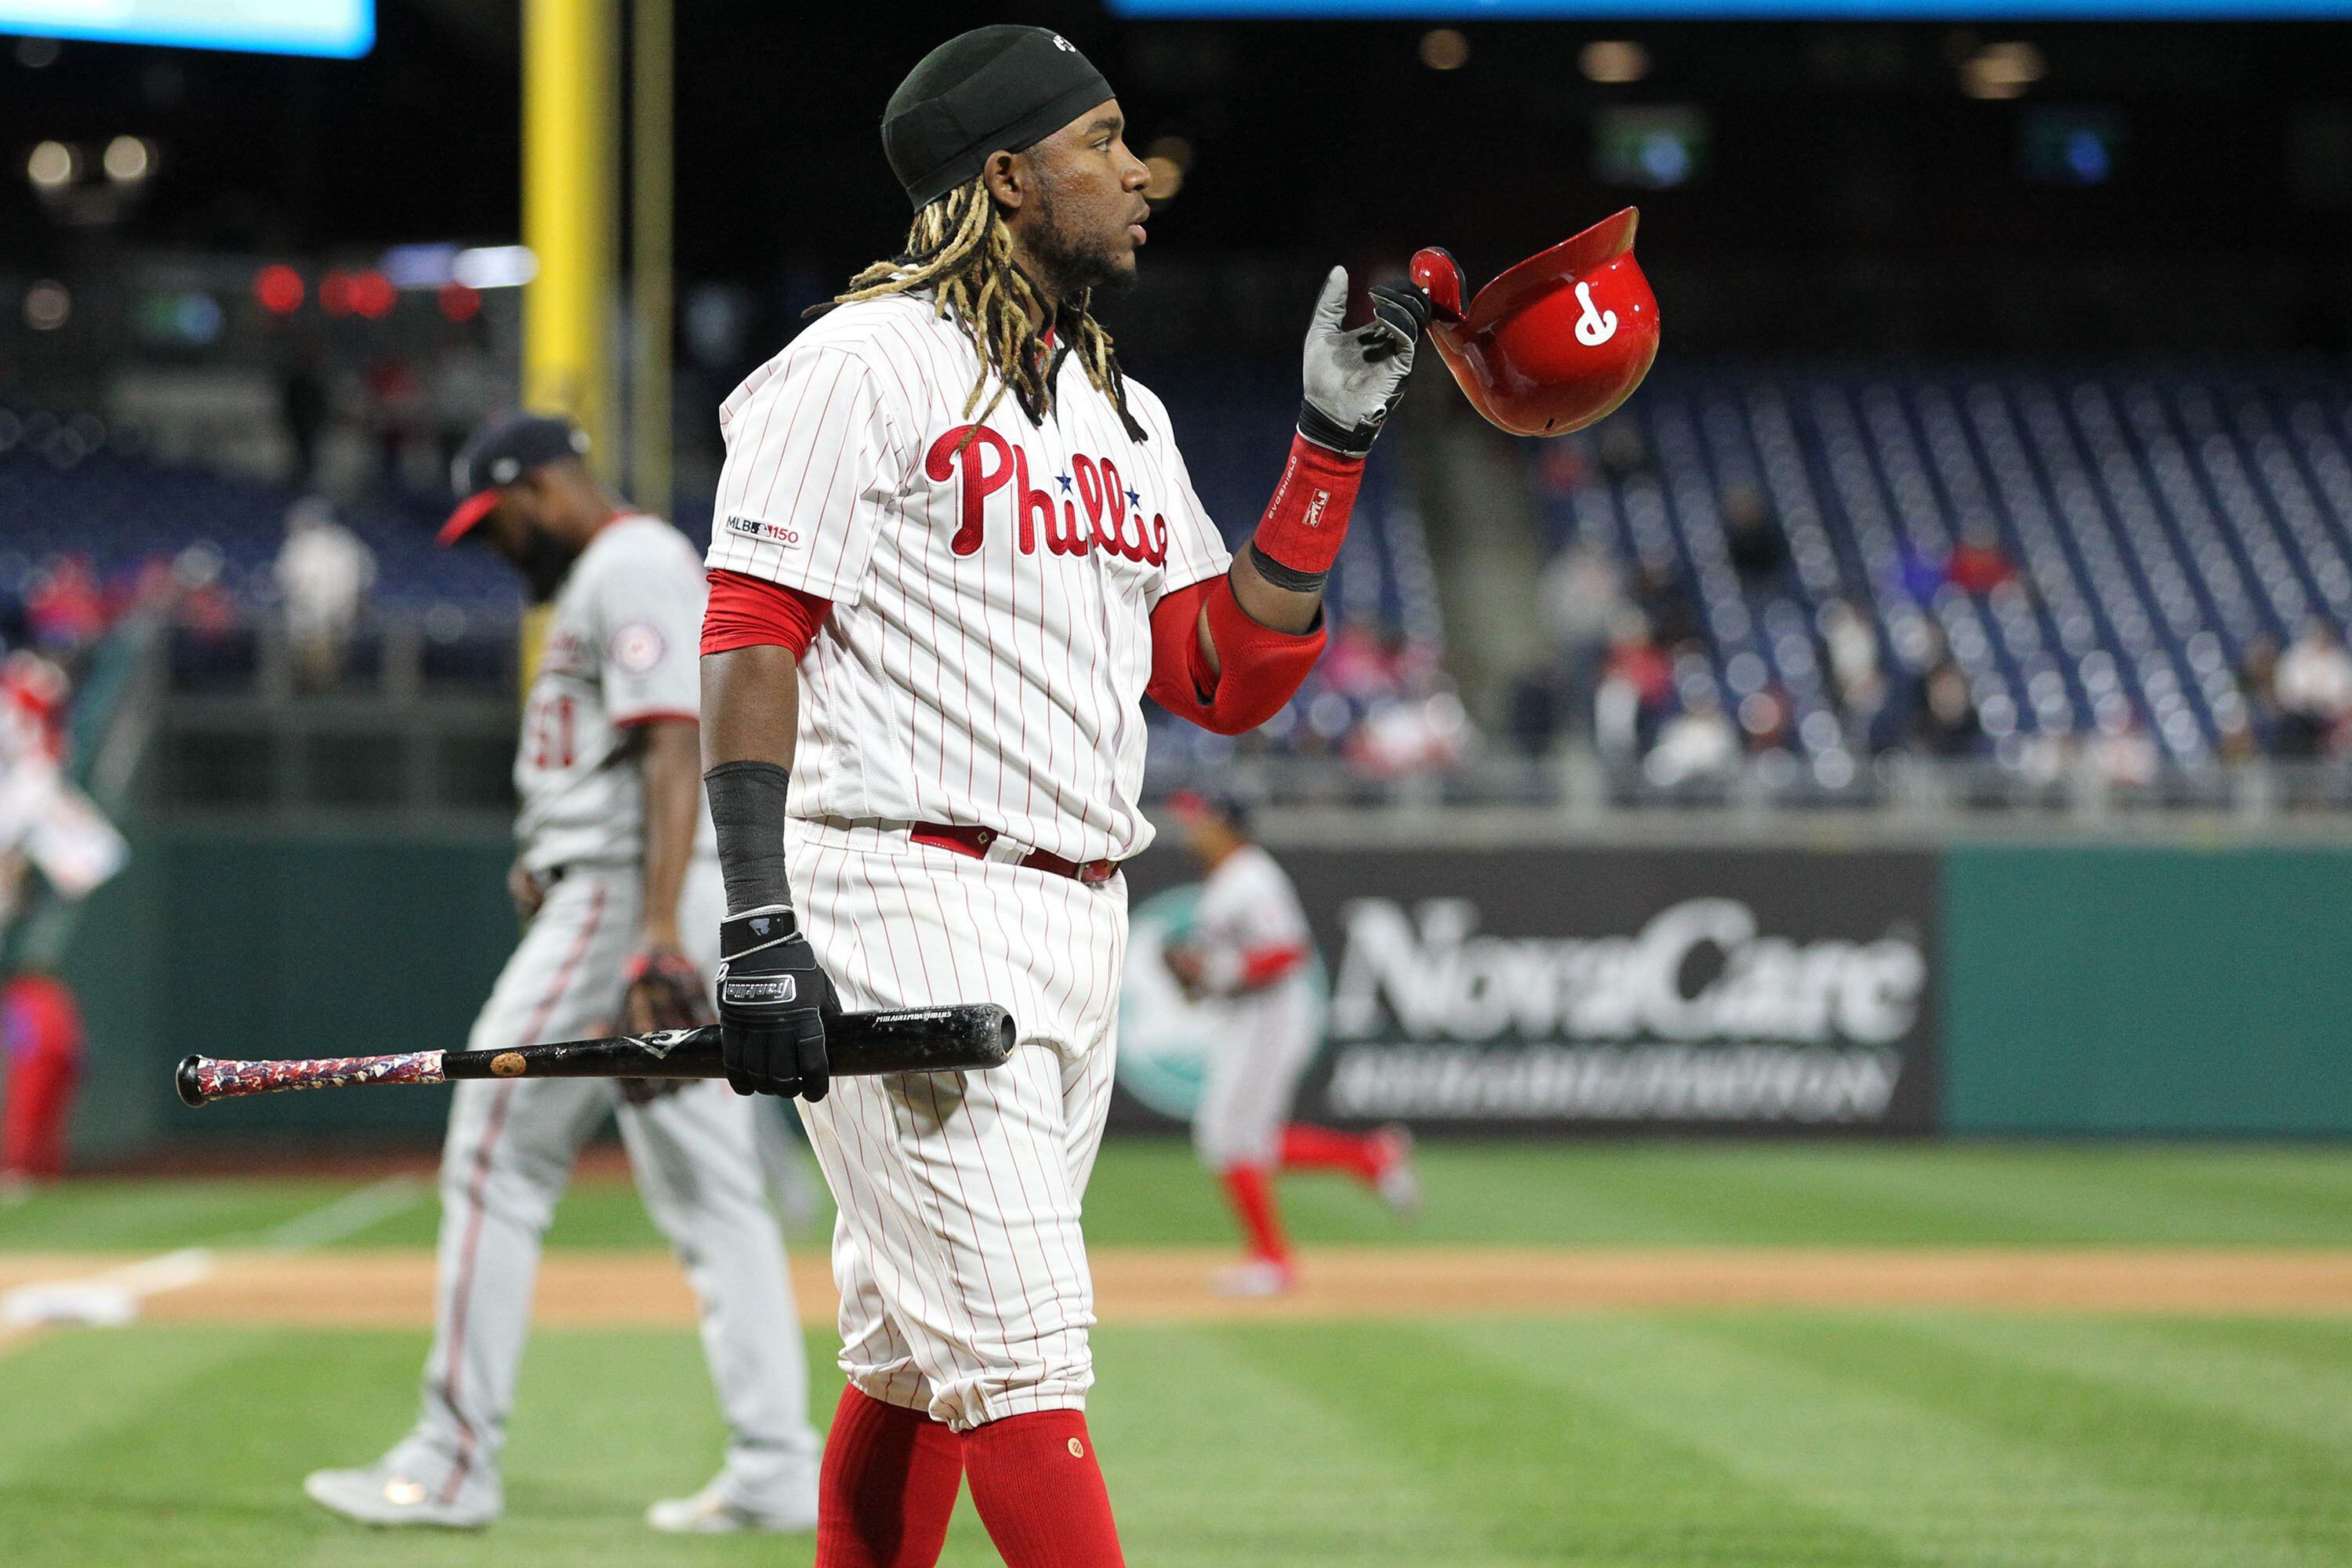 Phillies lose to the Nationals 15-1